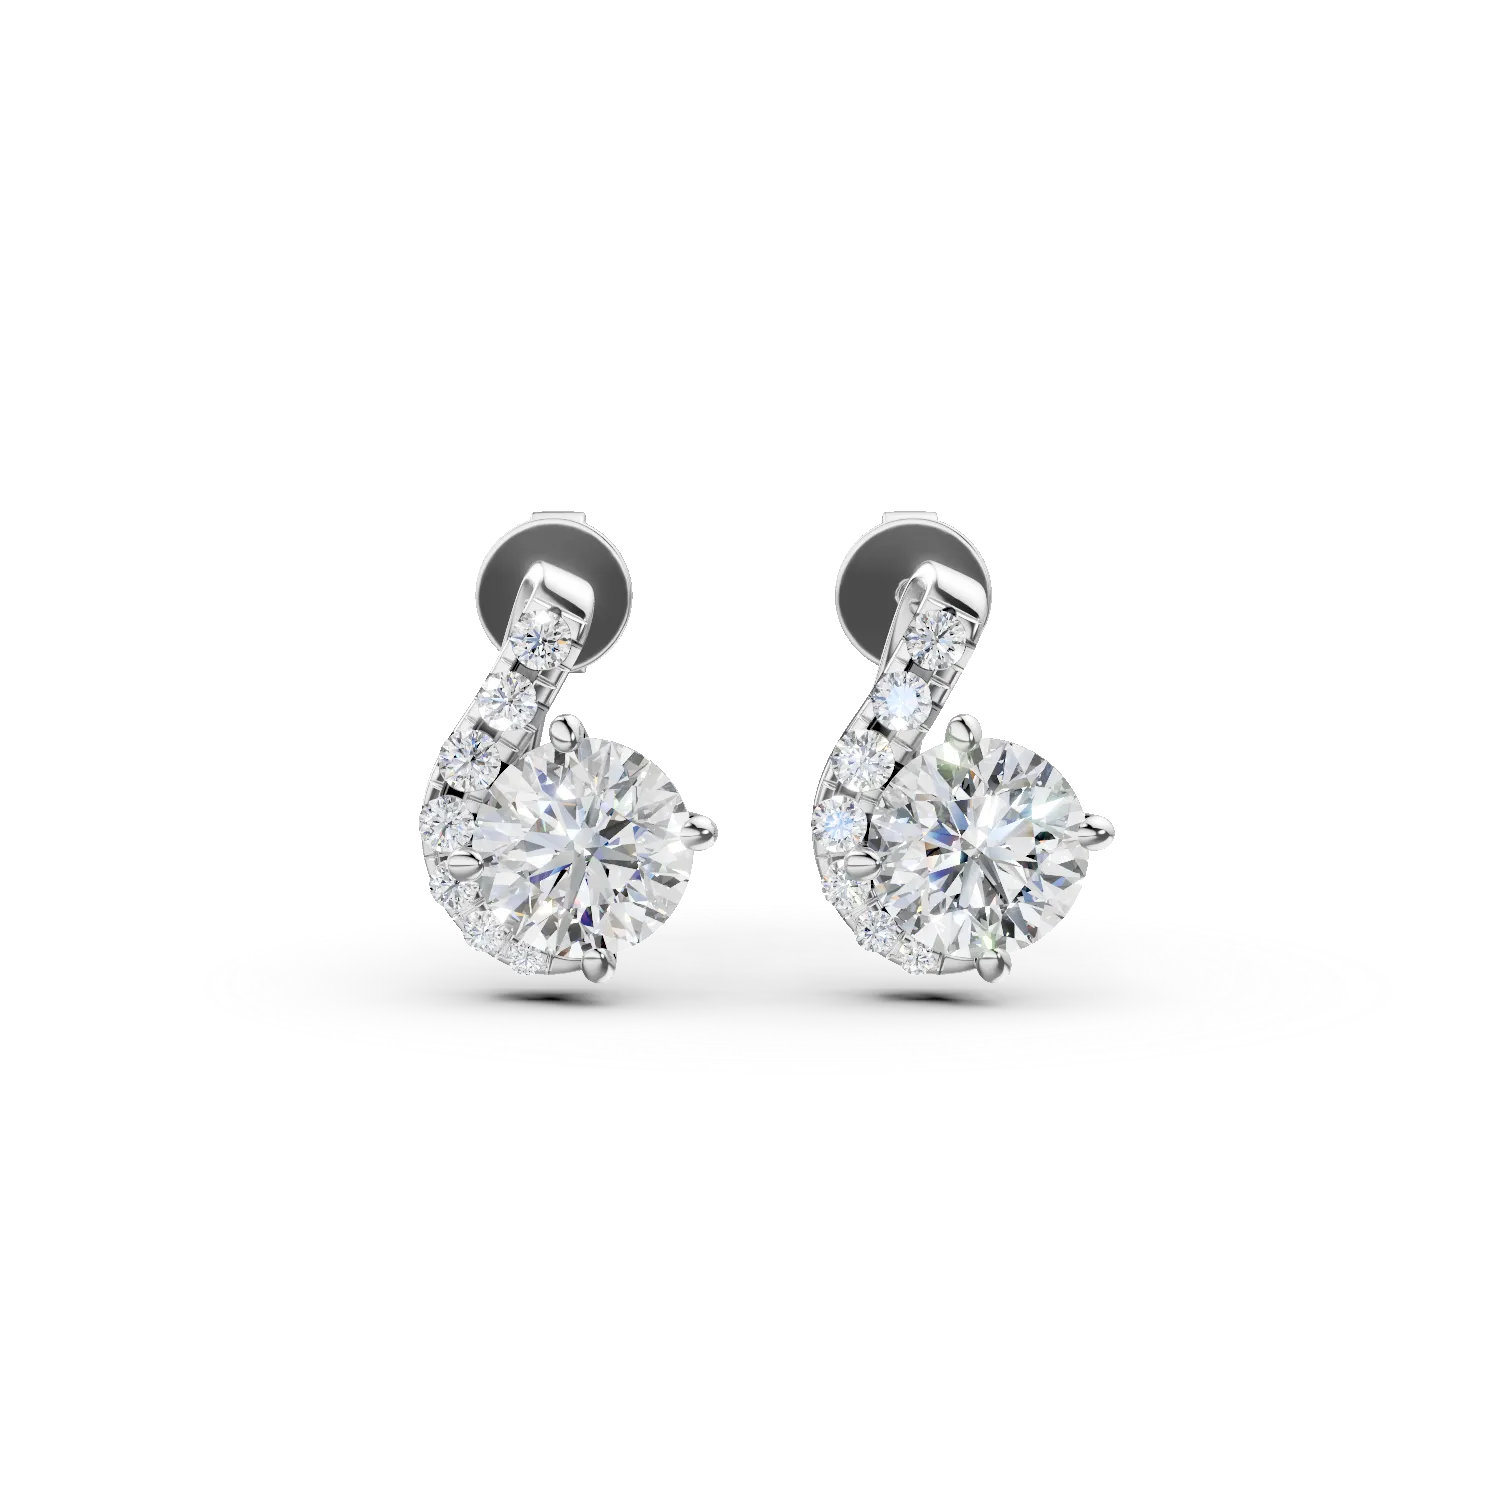 White gold Duet earrings with 1.1ct lab grown diamonds